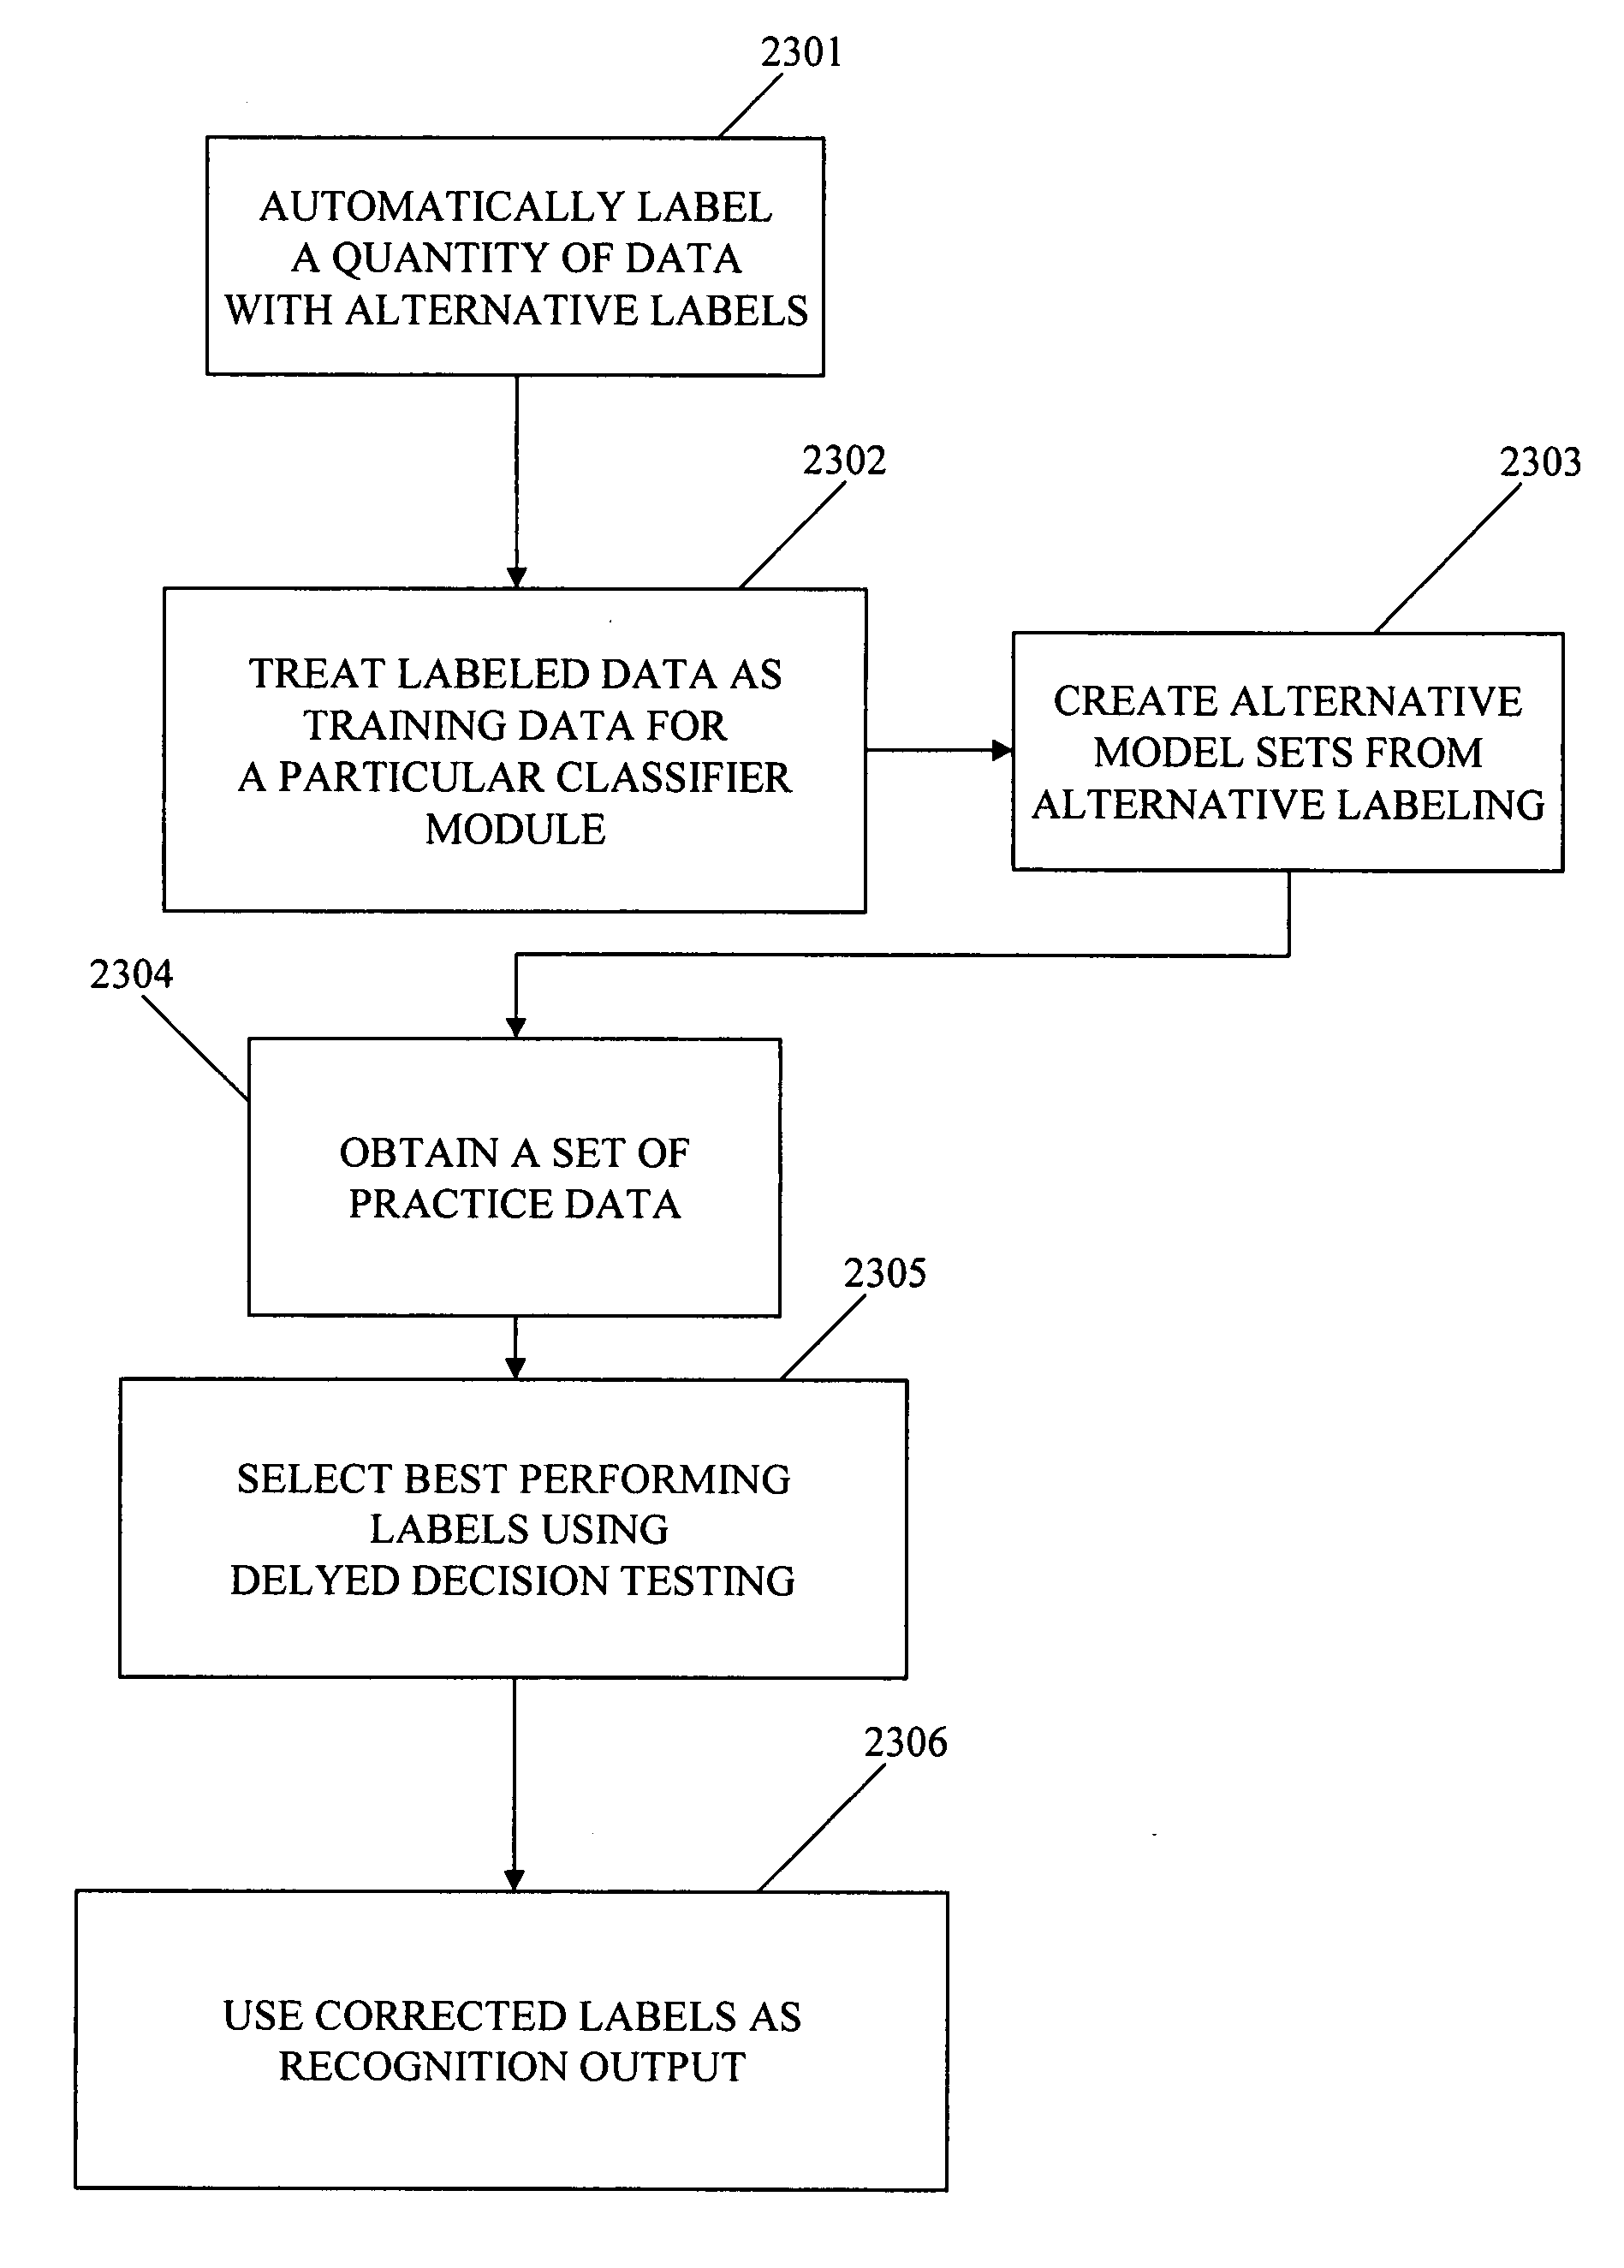 Robust pattern recognition system and method using socratic agents